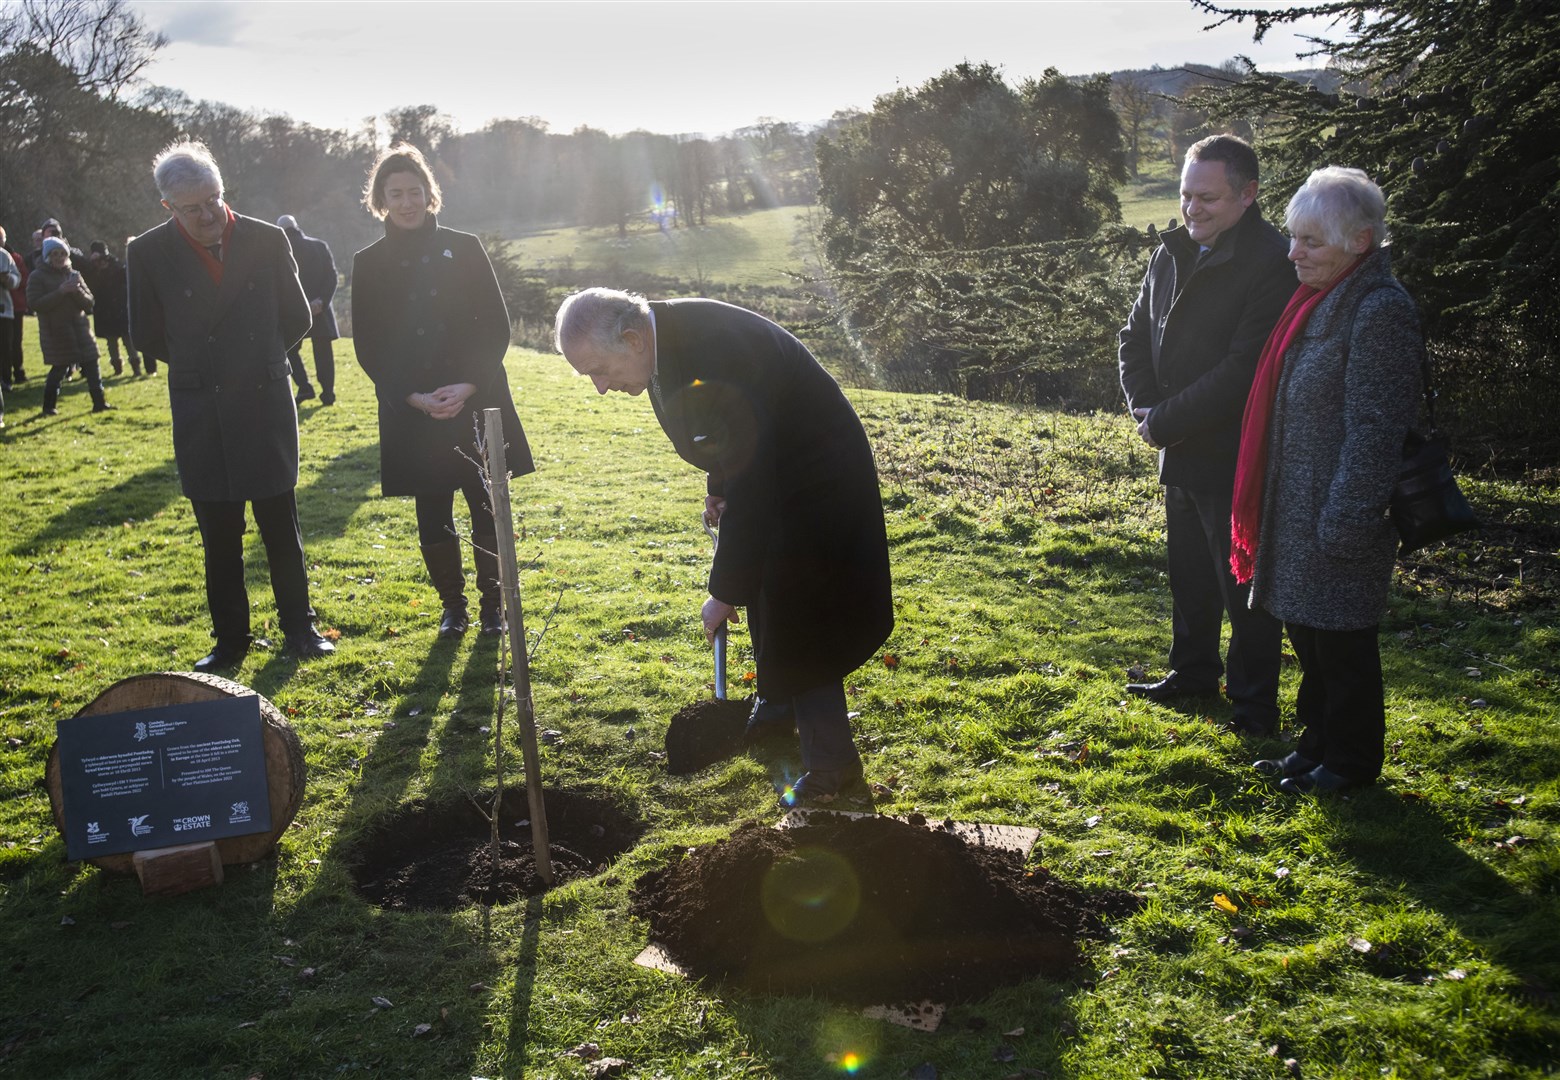 The King plants an oak sapling alongside First Minister of Wales Mark Drakeford, at the National Trust managed estate of Erddig (David Rose/Daily Telegraph)